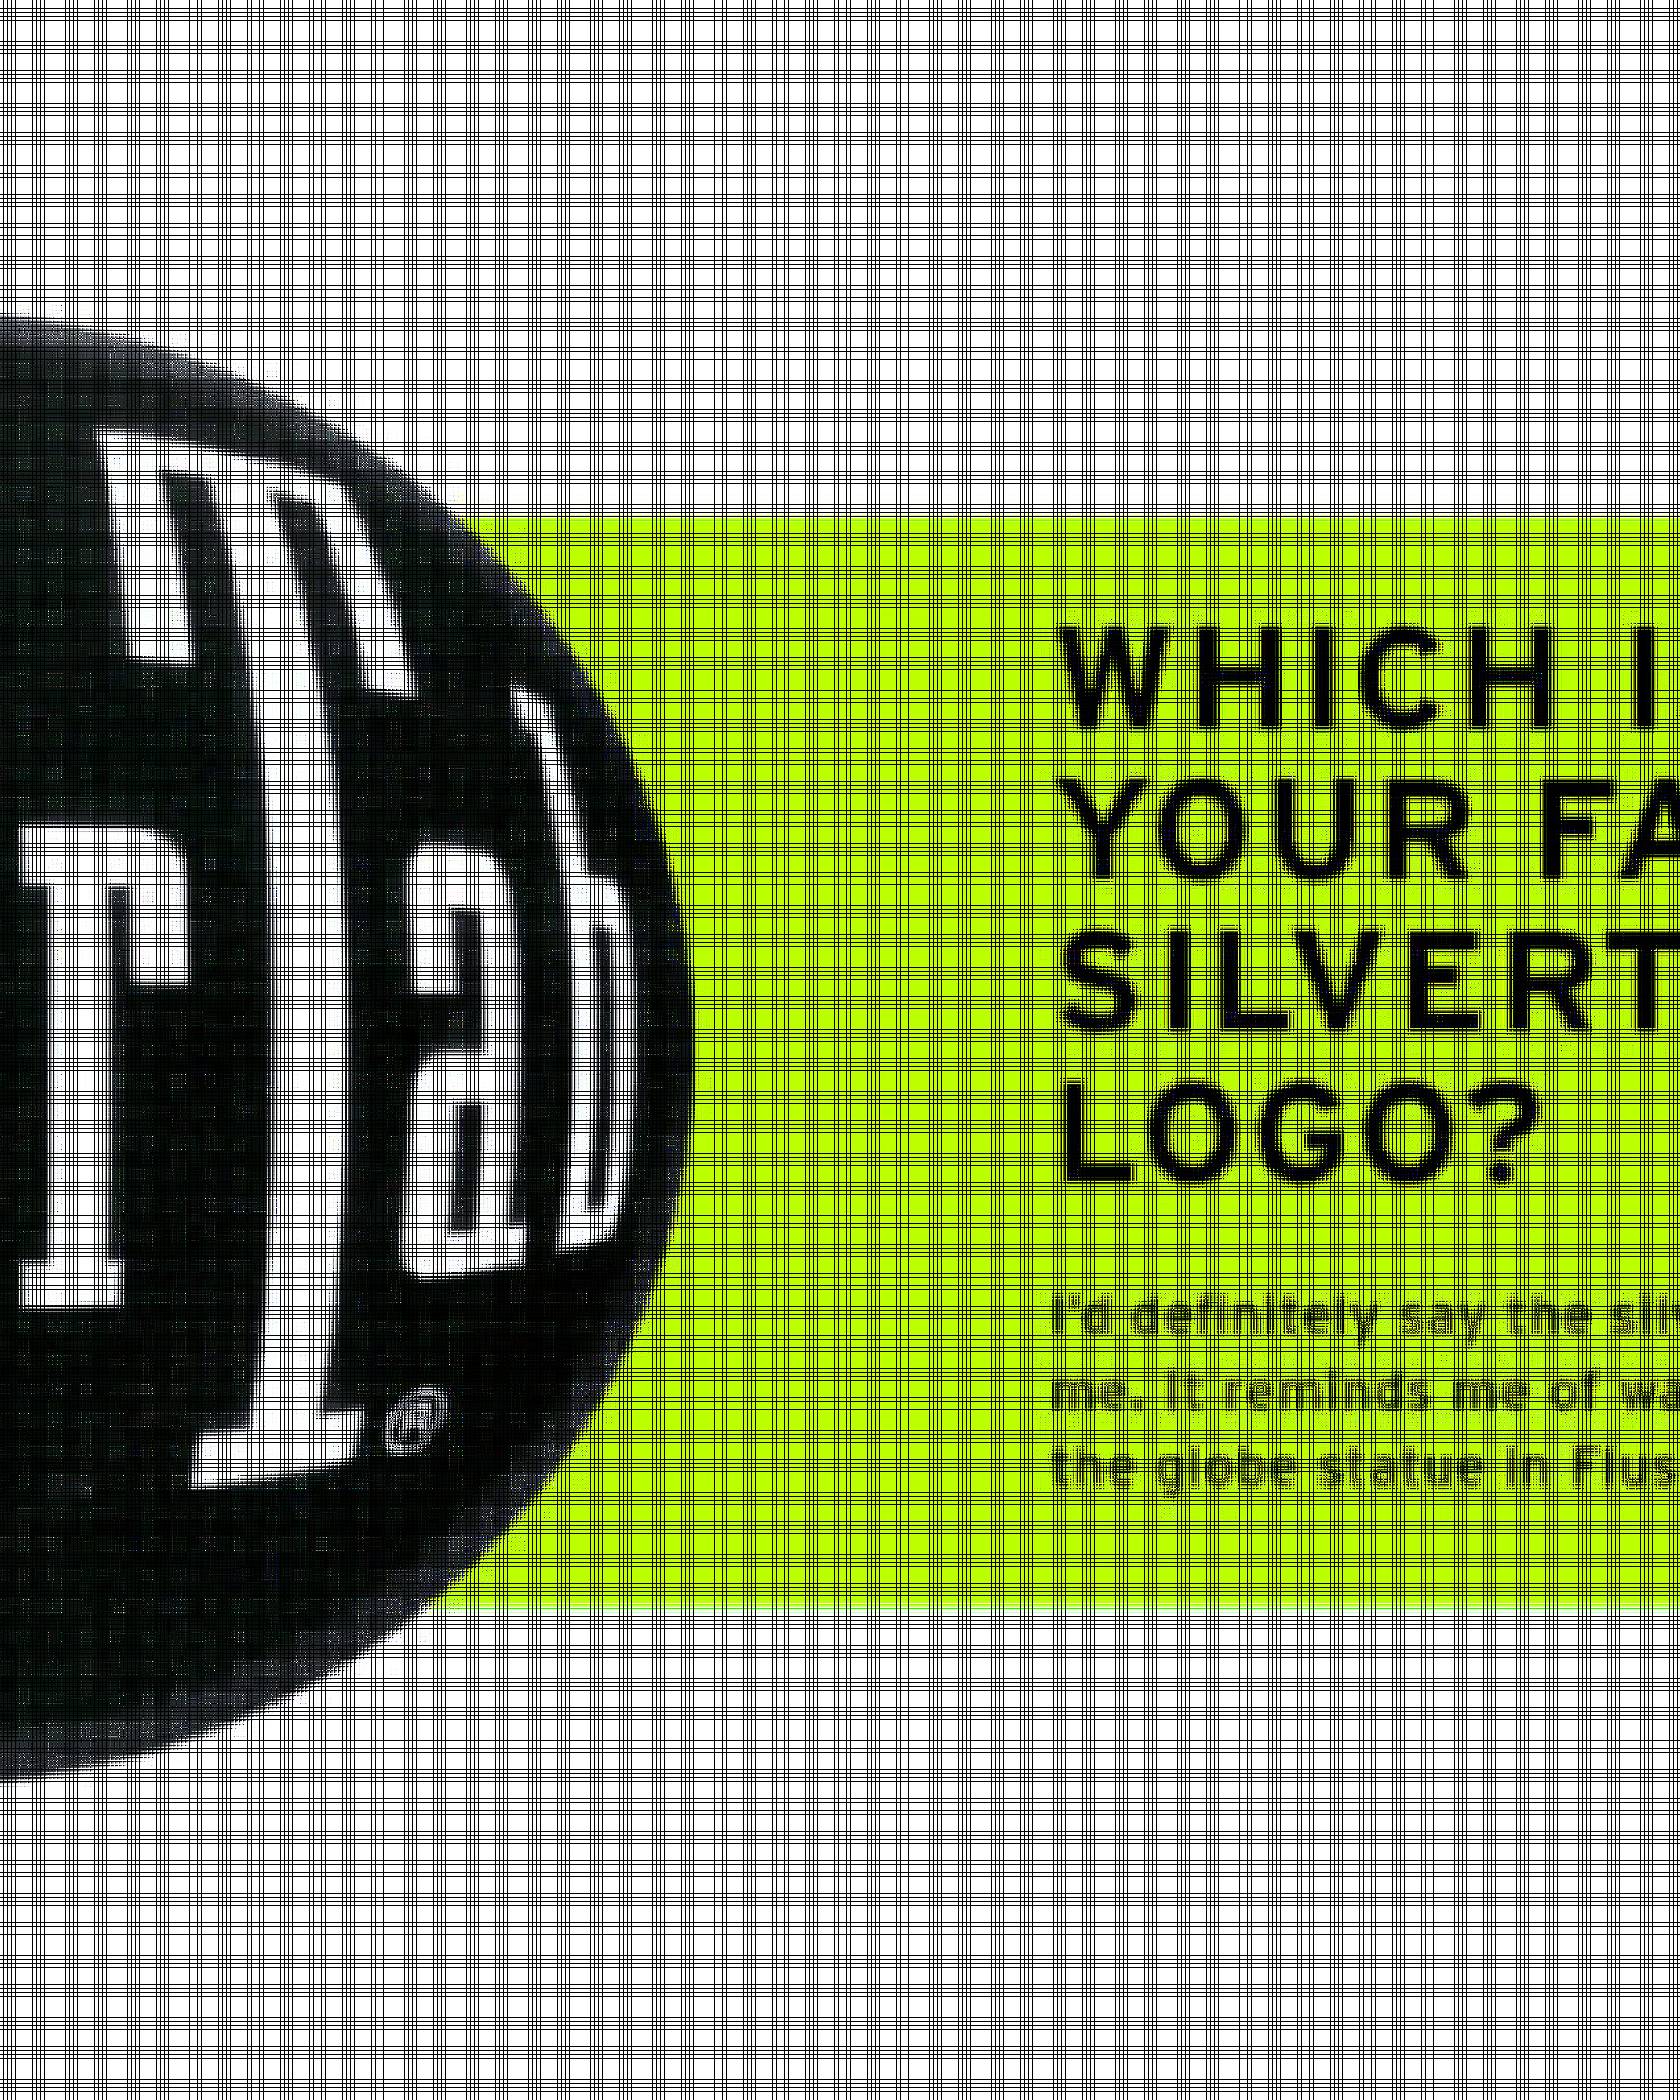 Image of SilverTab logo with text reading: Which is your favorite SilverTab logo? I'd definitely say the silver ball. That logo screams '90s to me. It reminds me of watching old skate videos and seeing the globe statue in Flushing Meadows.